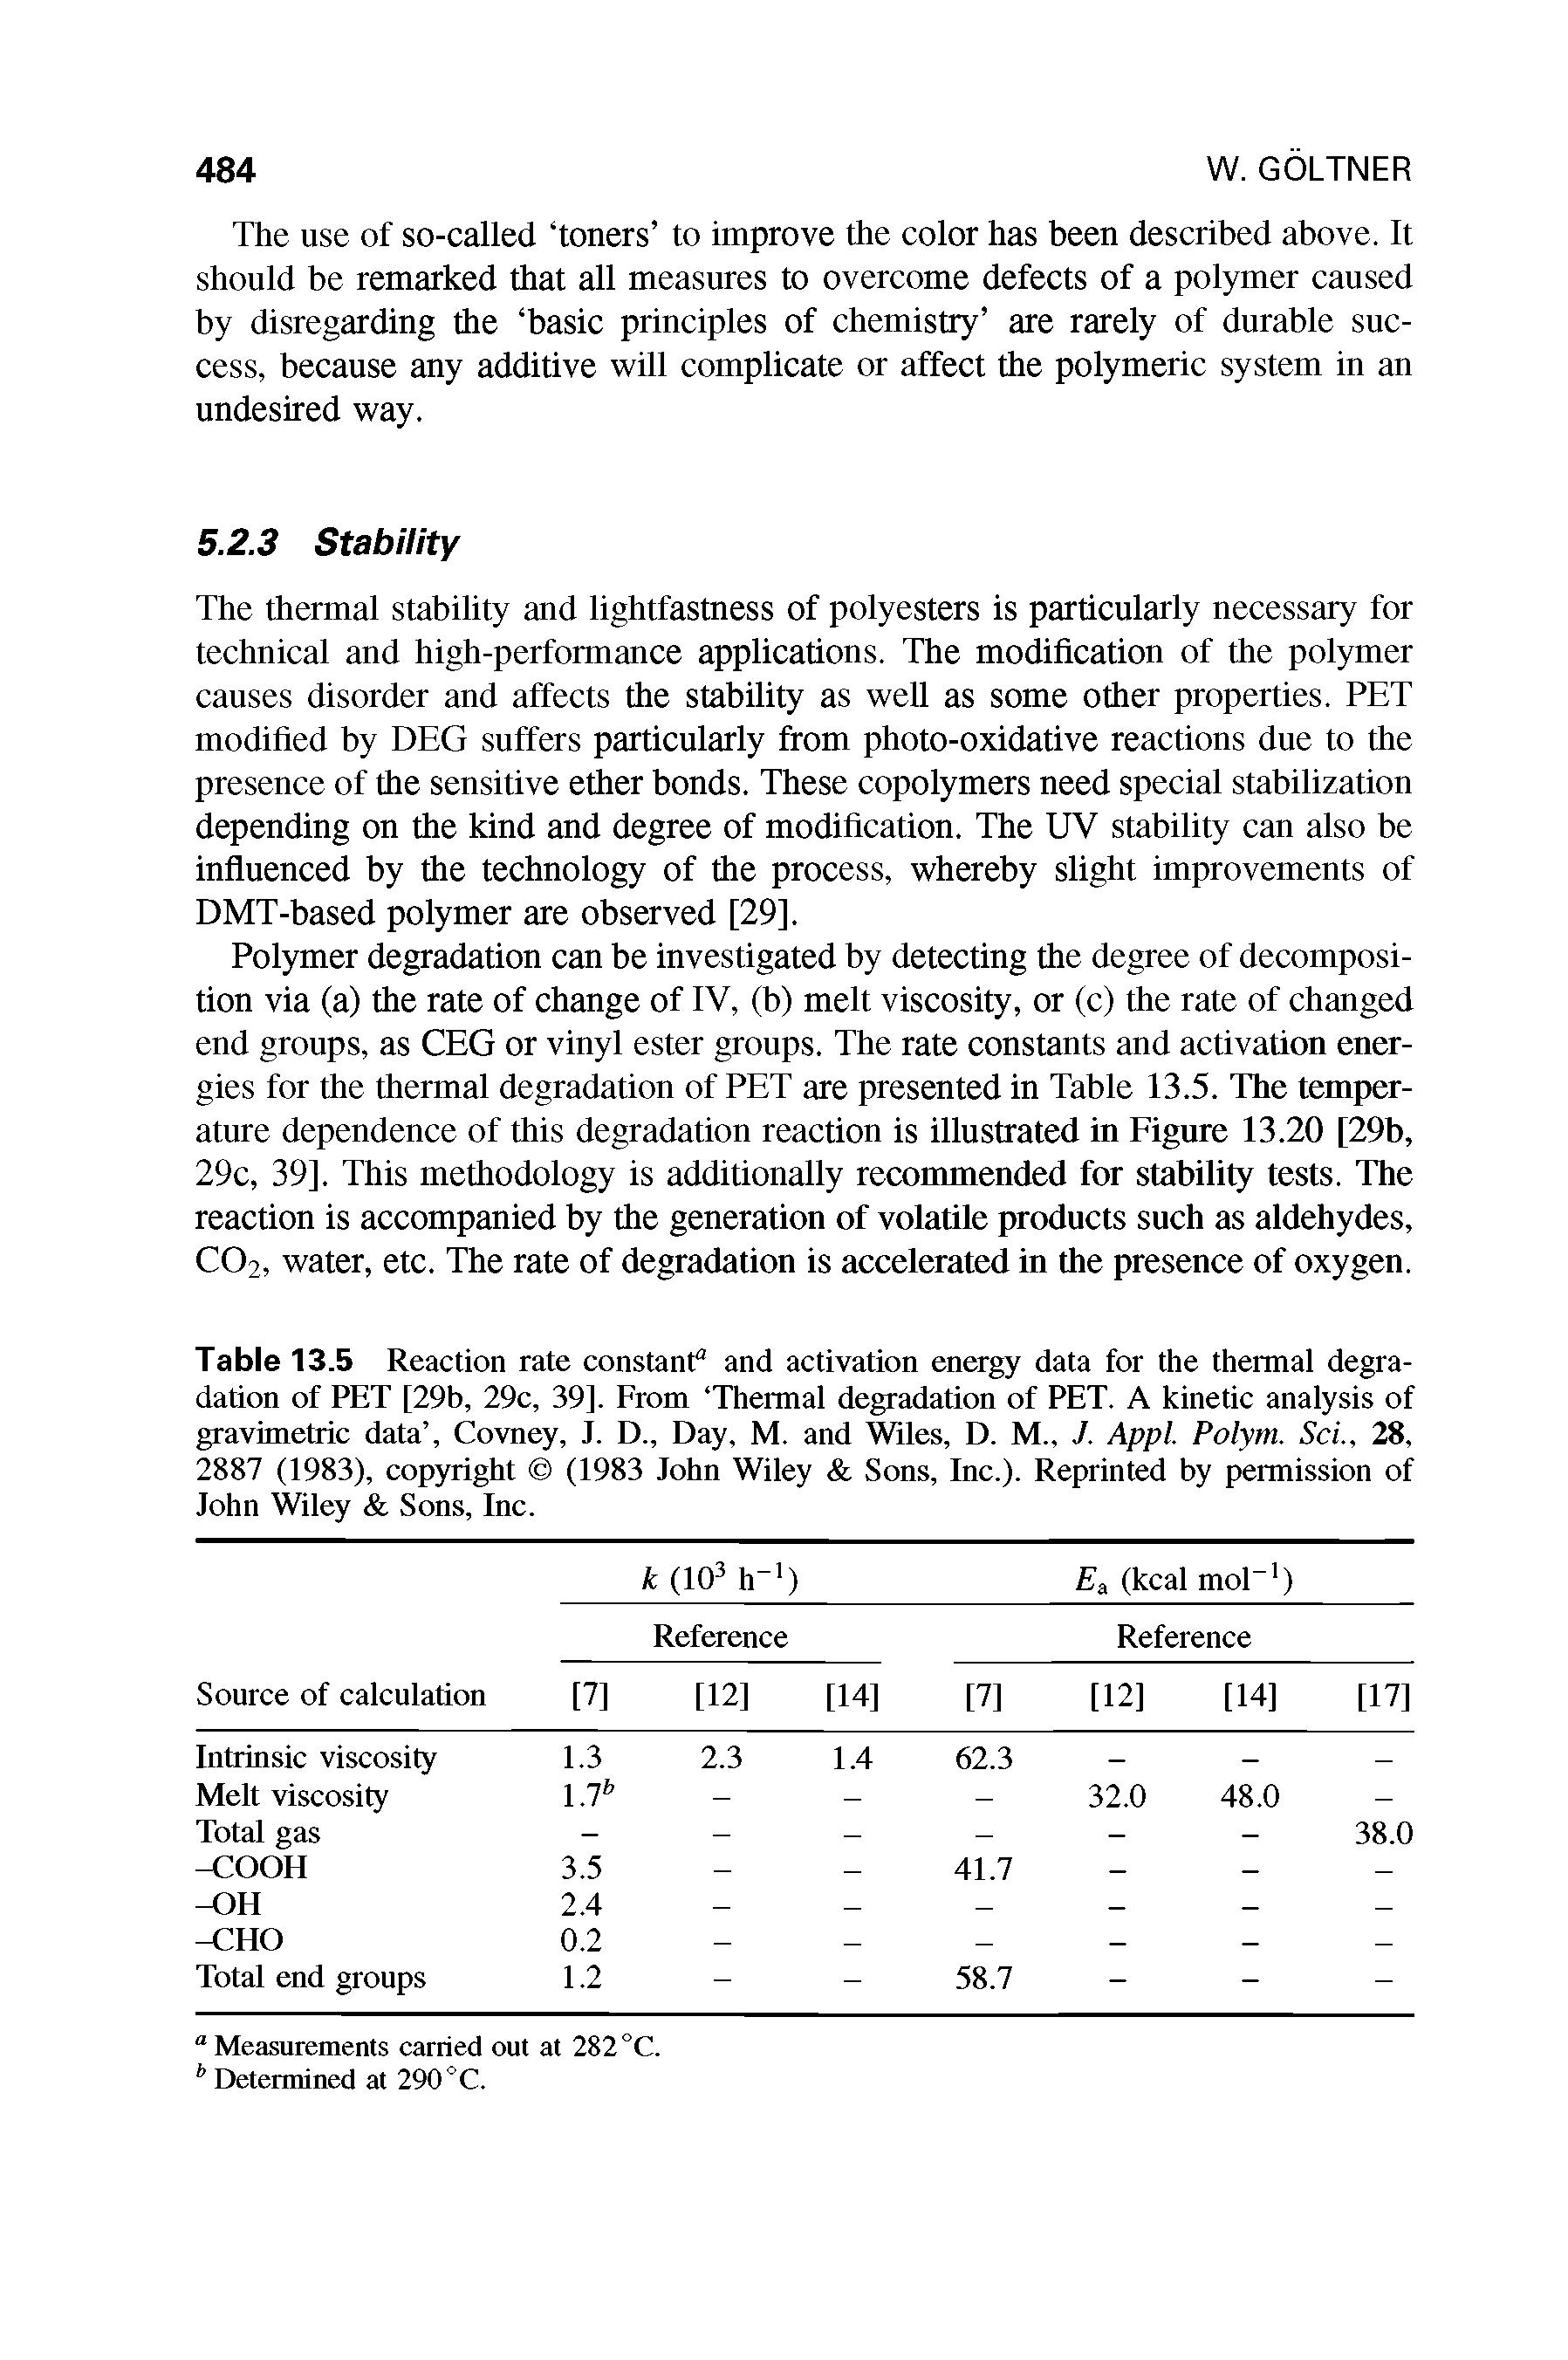 Table 13.5 Reaction rate constant0 and activation energy data for the thermal degradation of PET [29b, 29c, 39]. From Thermal degradation of PET. A kinetic analysis of gravimetric data , Covney, J. D., Day, M. and Wiles, D. M., J. Appl. Polym. Sci., 28, 2887 (1983), copyright (1983 John Wiley Sons, Inc.). Reprinted by permission of John Wiley Sons, Inc.